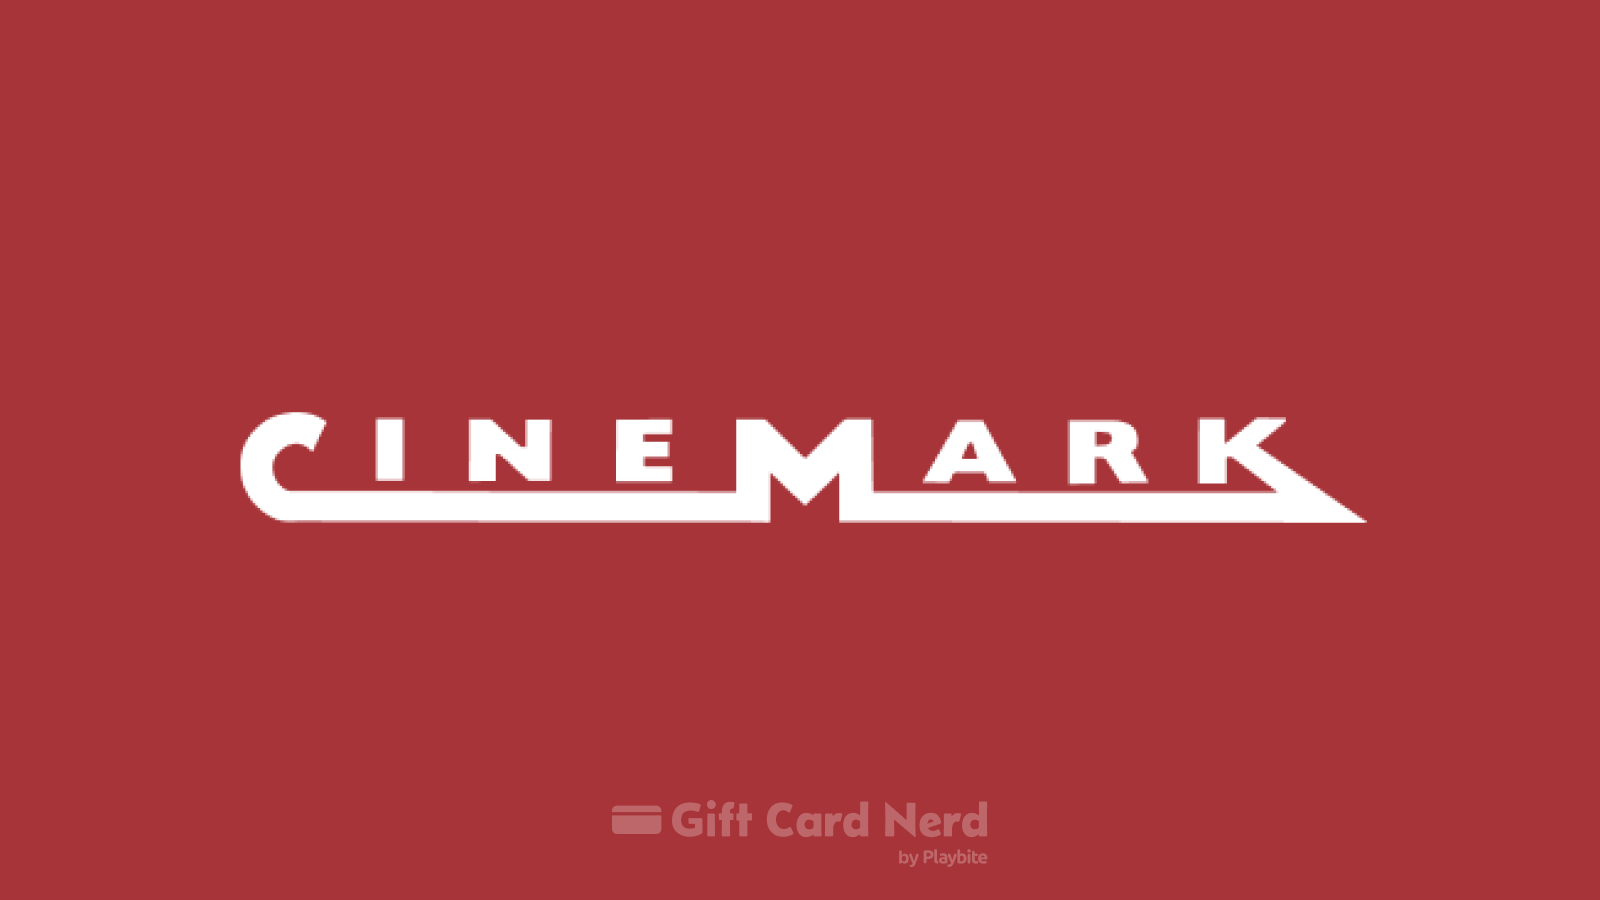 Can I Use a Cinemark Gift Card on Postmates?